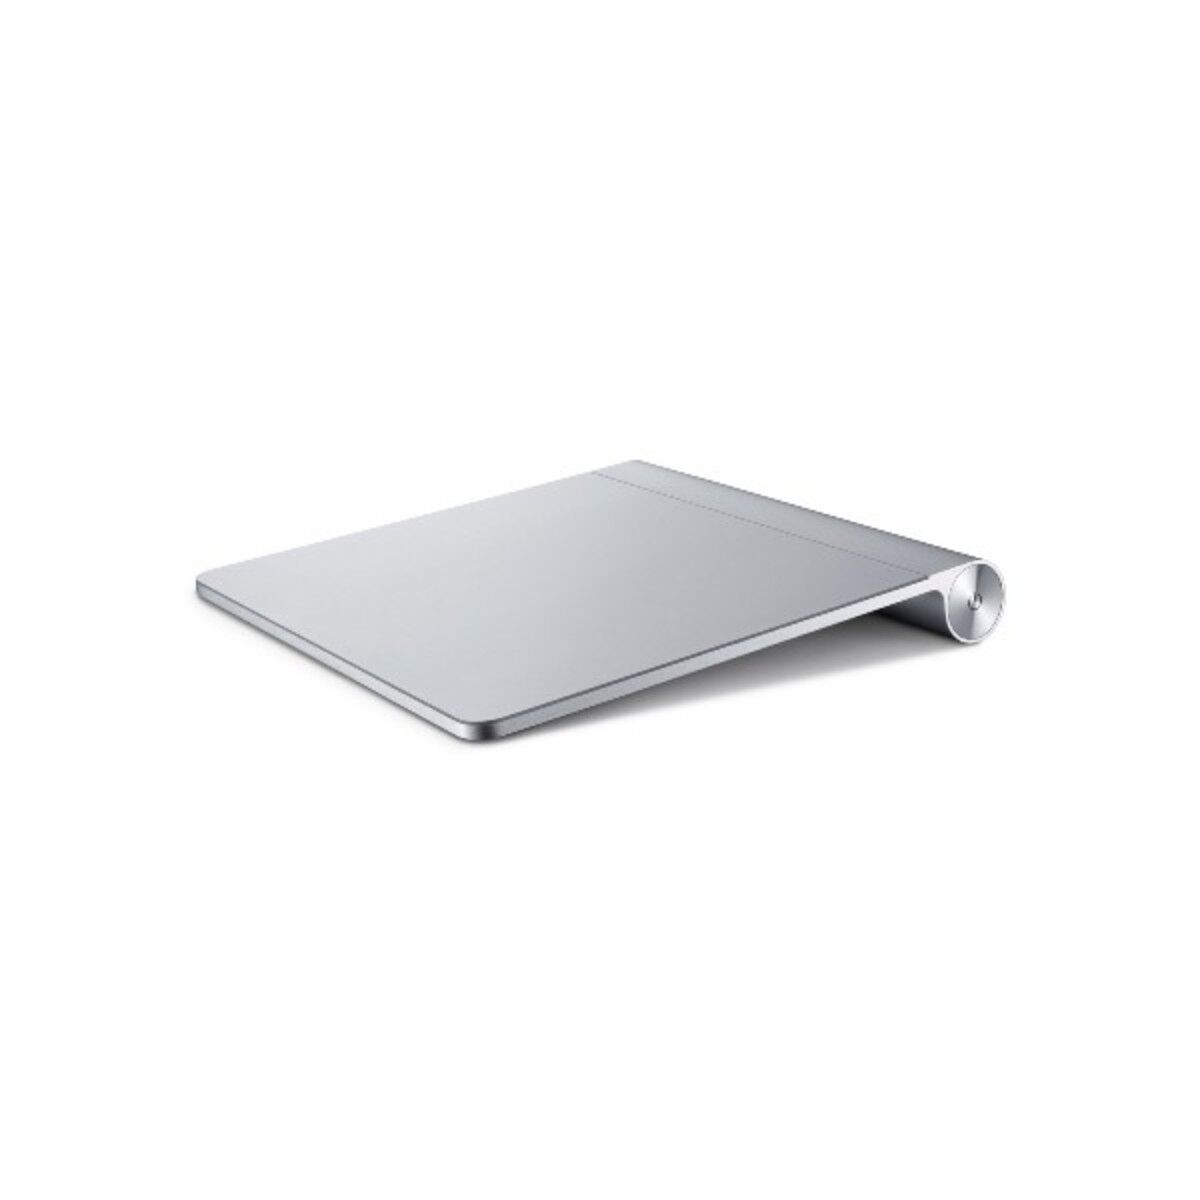 Apple Magic Trackpad Bluetooth Wireless MC380LL/A A1339 New without Retail Box